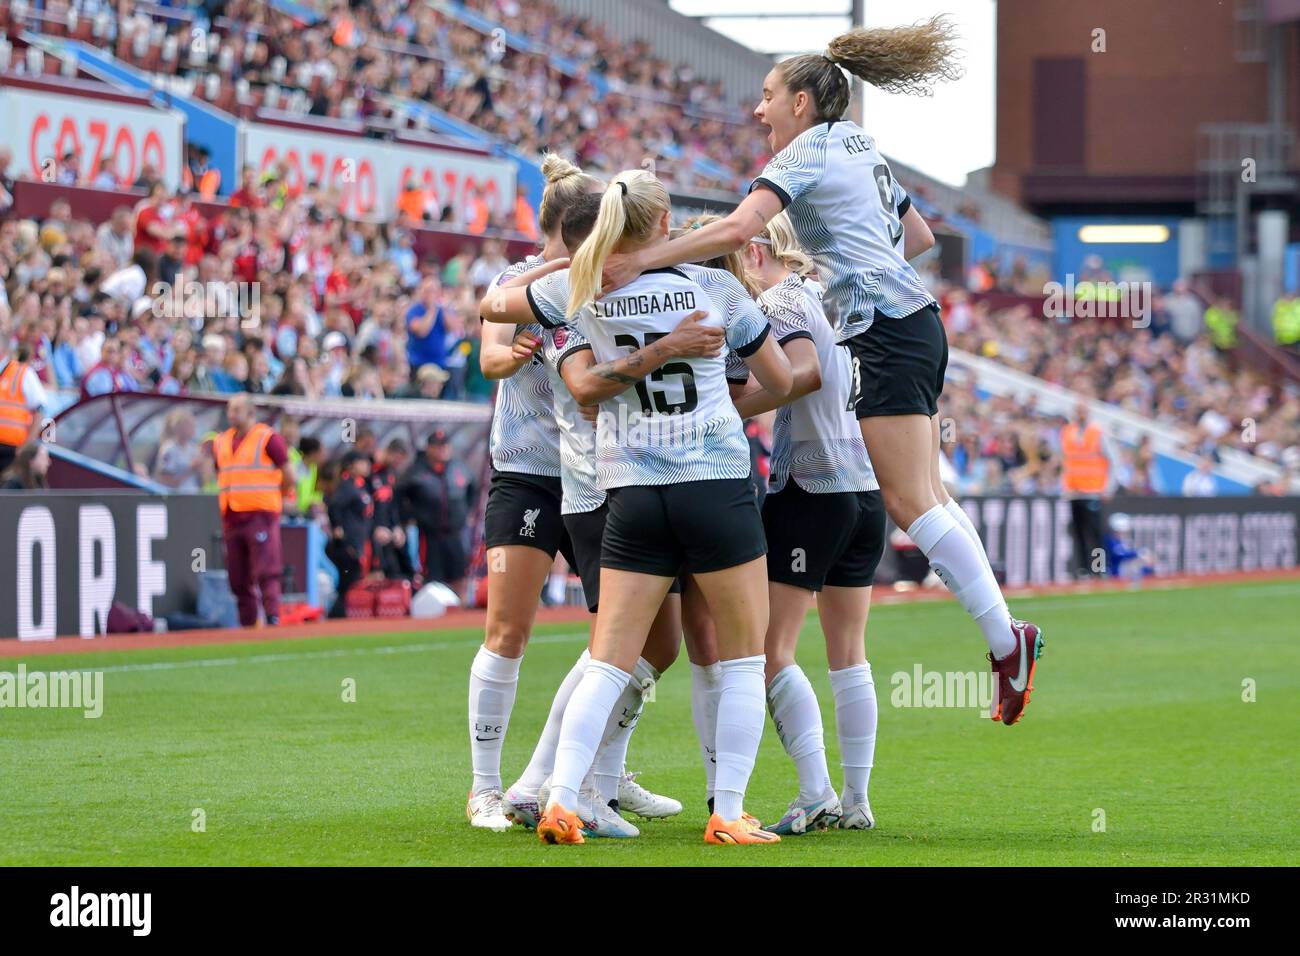 Birmingham, England. 21 May 2023. Liverpool players celebrate their side's third goal during the Barclays Women's Super League game between Aston Villa and Liverpool at Villa Park in Birmingham, England, UK on 21 May 2023. Credit: Duncan Thomas/Majestic Media/Alamy Live News. Stock Photo